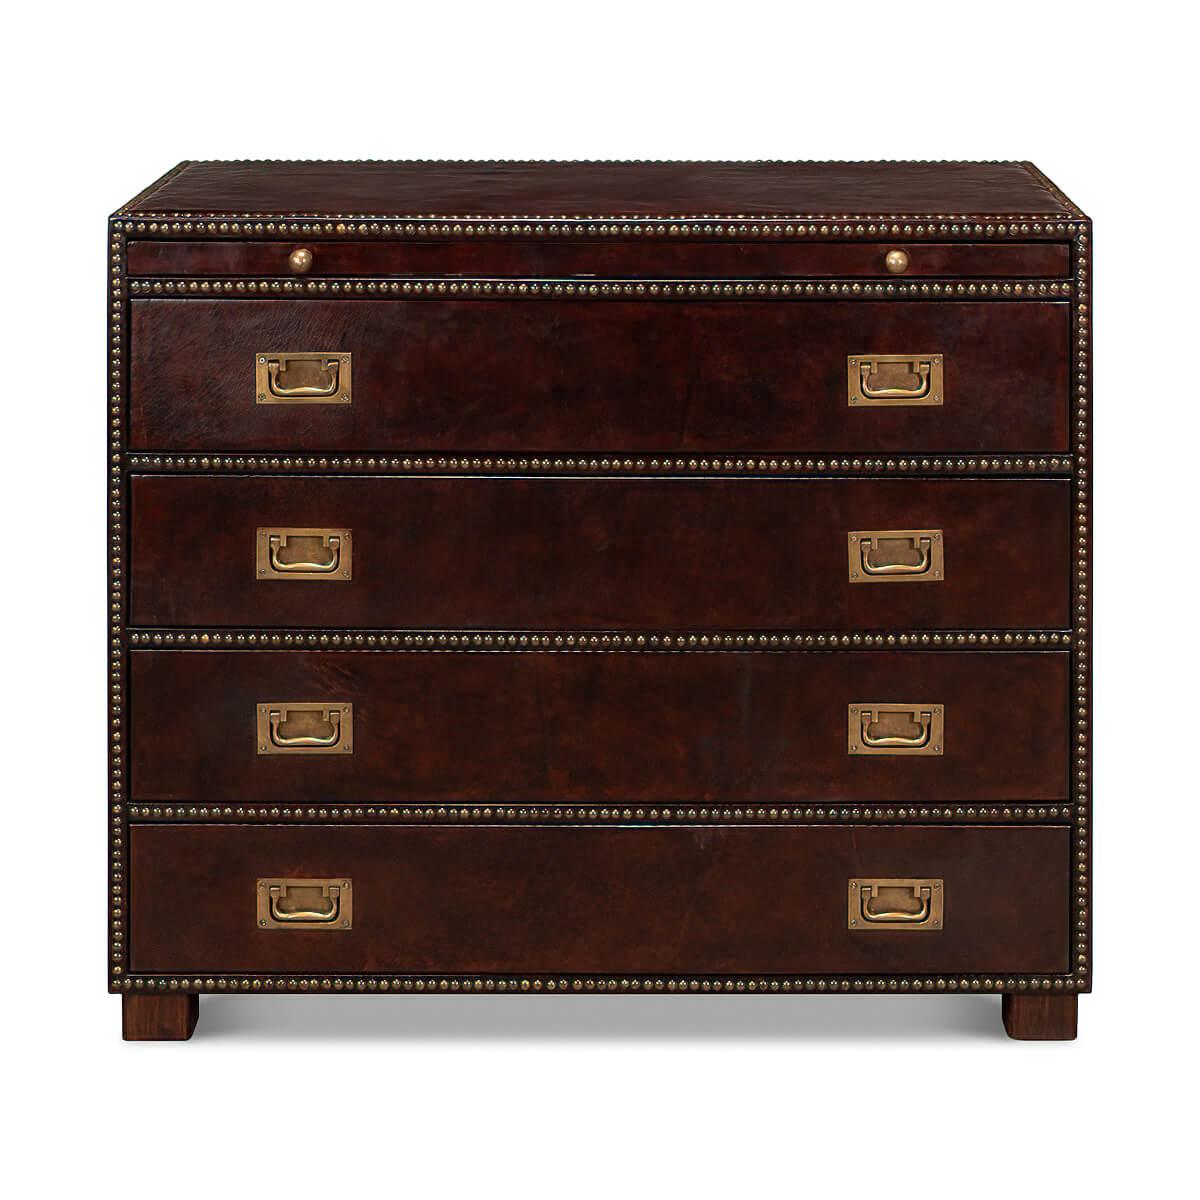 A Campaign style dresser with antique brown leather-wrapped sides. With four drawers and a slide, brass handles, and nailhead details all around the frame. 

Dimensions
40